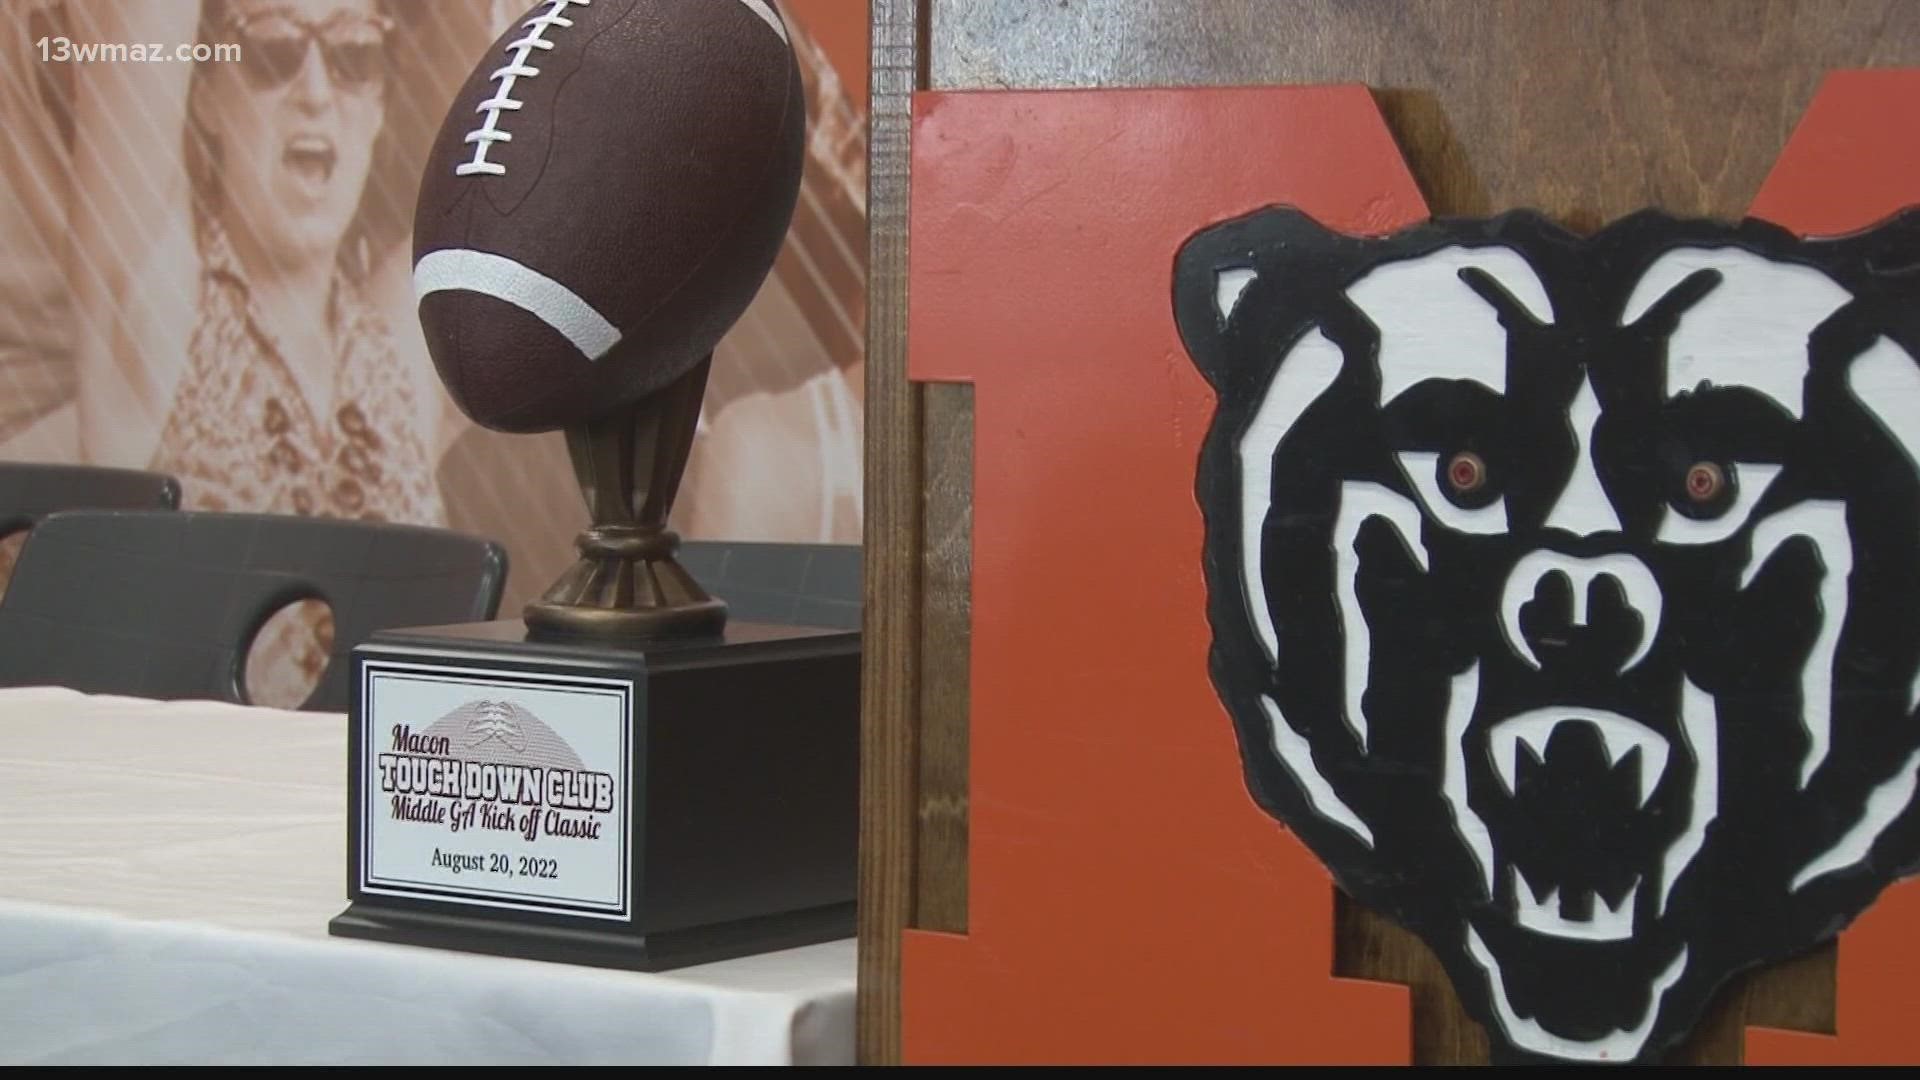 4 teams were on hand for the kickoff's press conference at Mercer University Monday